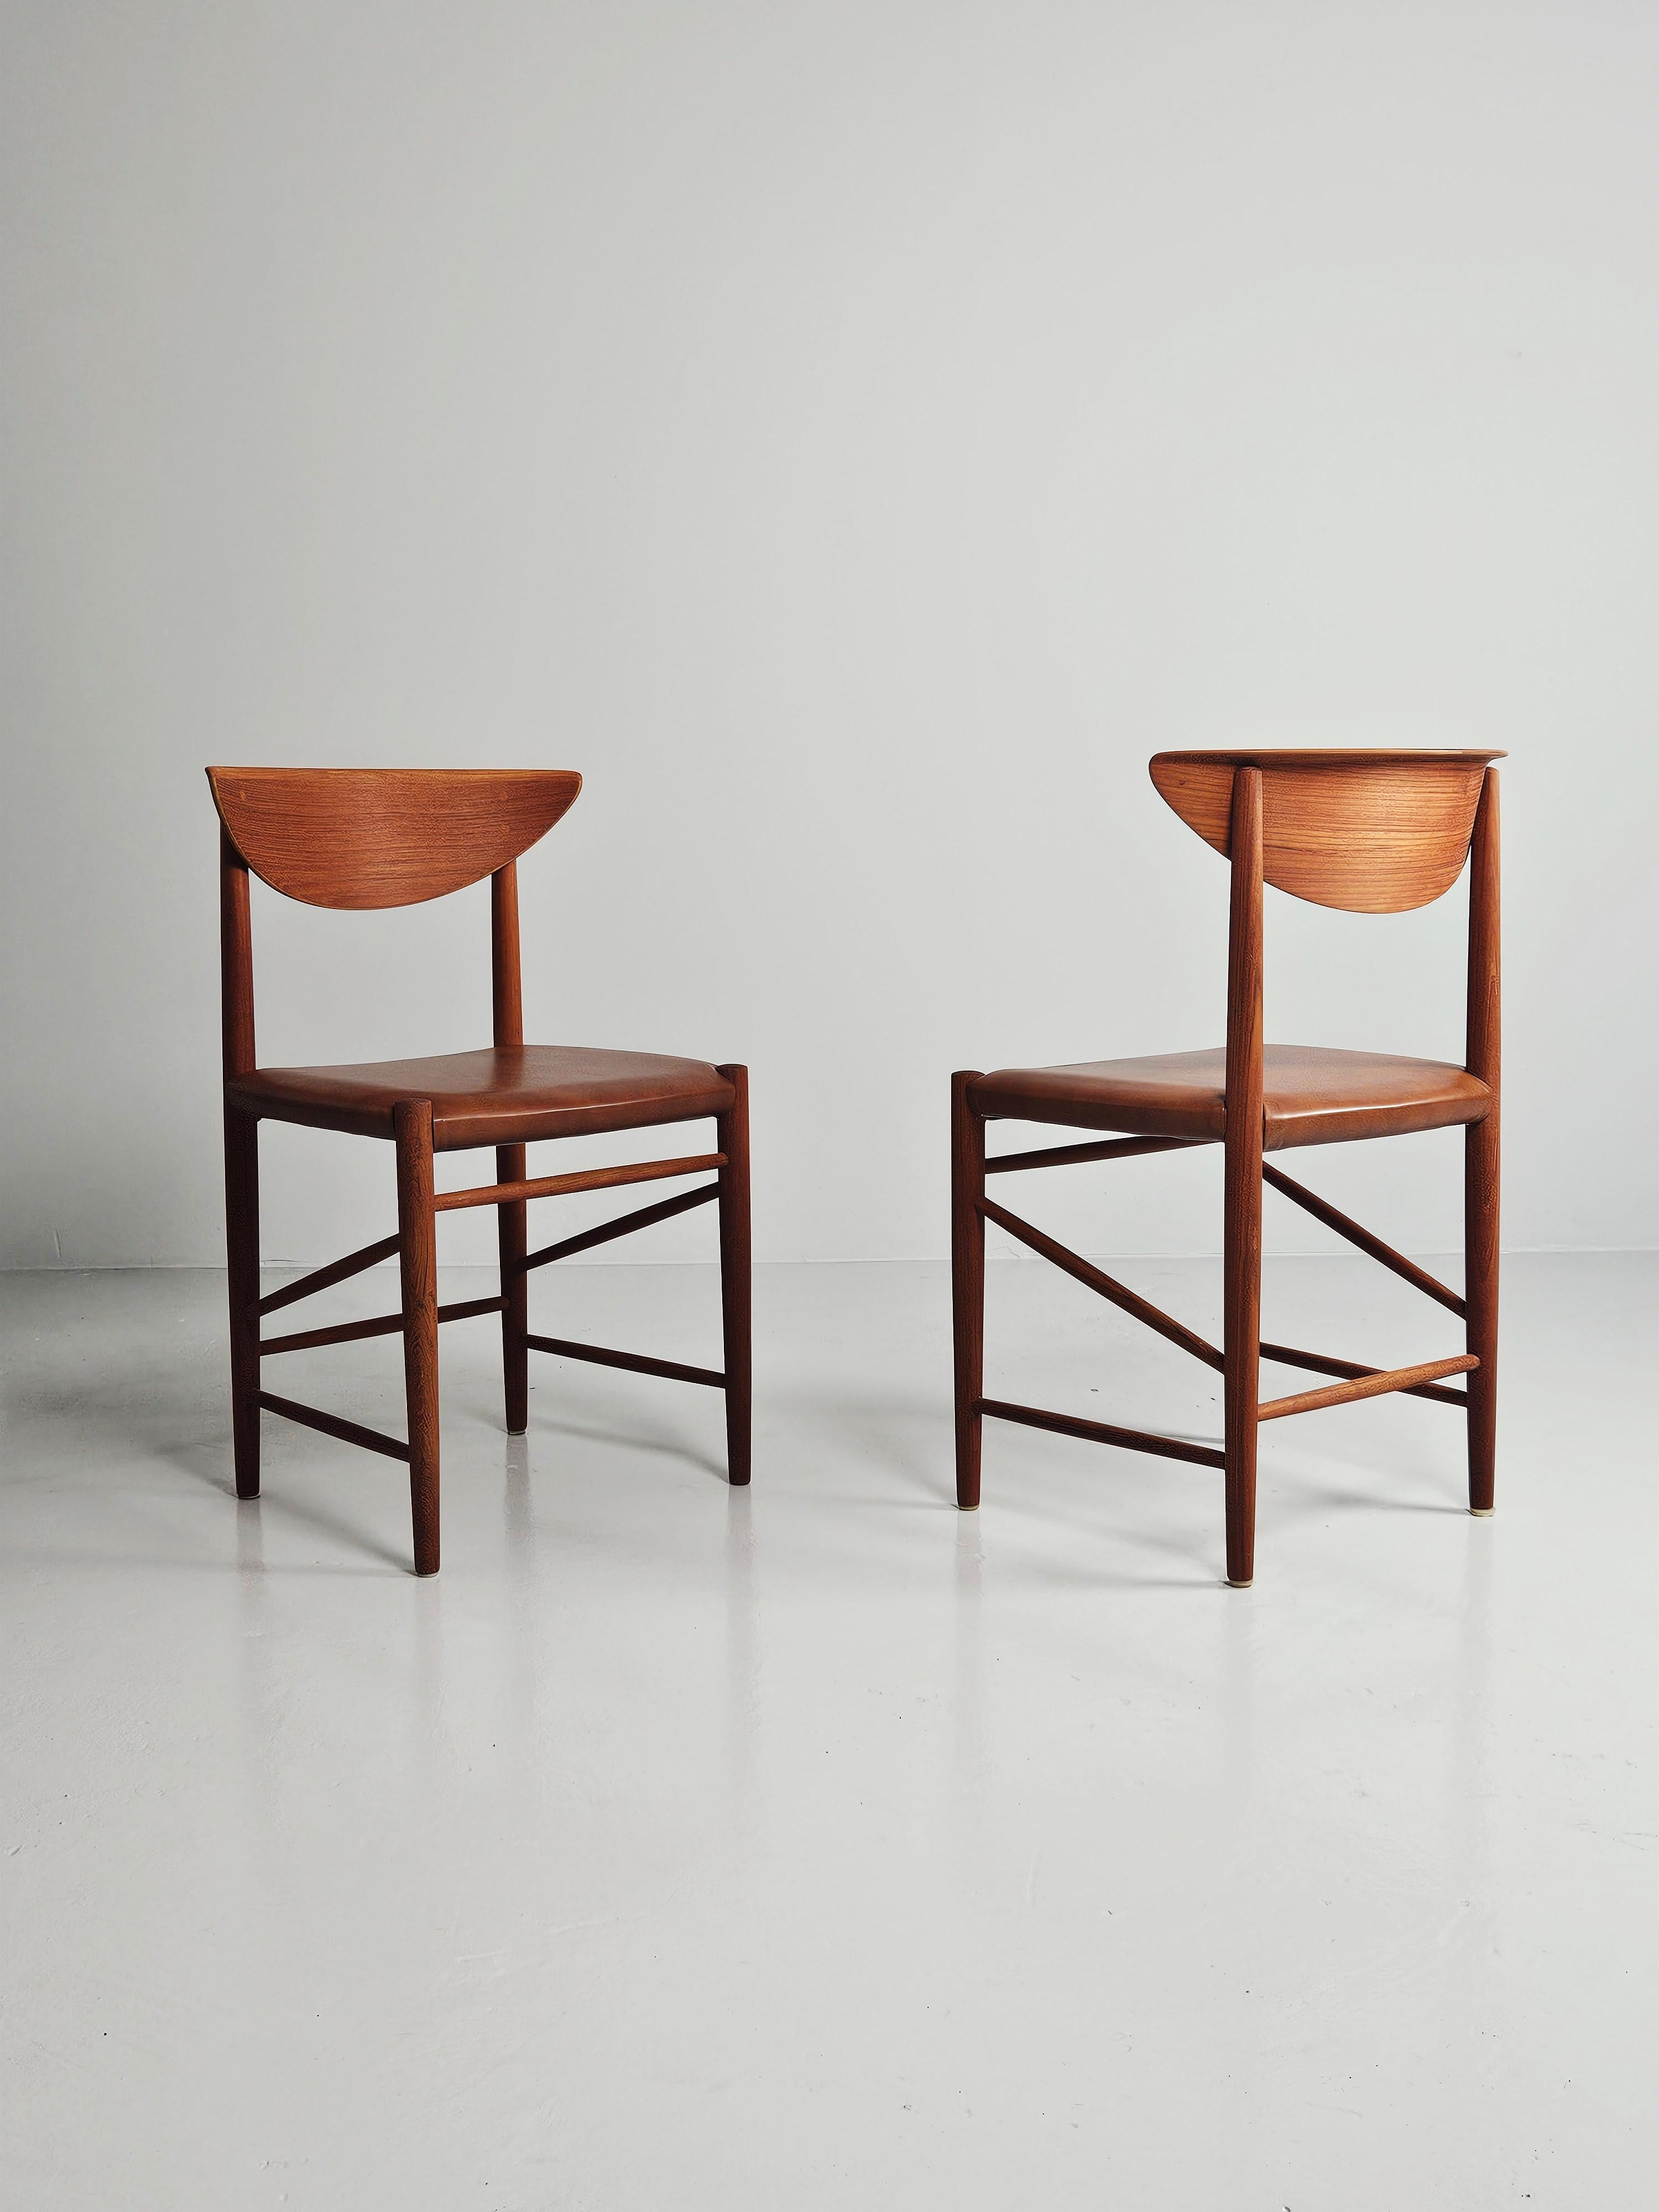 Beautiful set of six dining chairs 'model 316' designed by Peter Hvidt in Denmark in 1955. 

Made in teak with seats of cognac colored leather. 